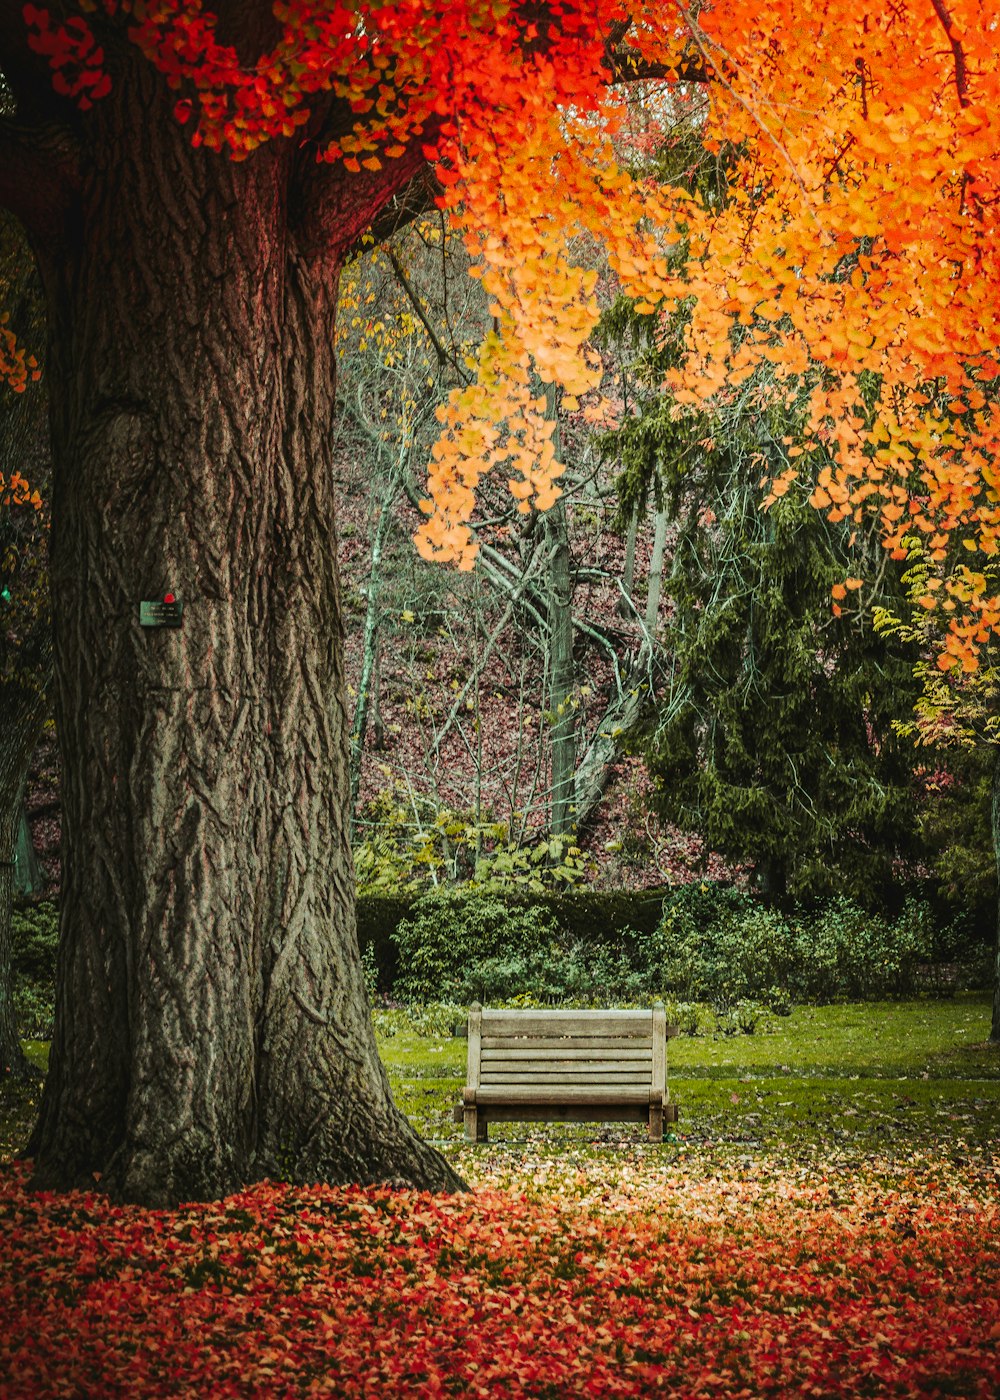 a park bench under a tree with leaves on the ground